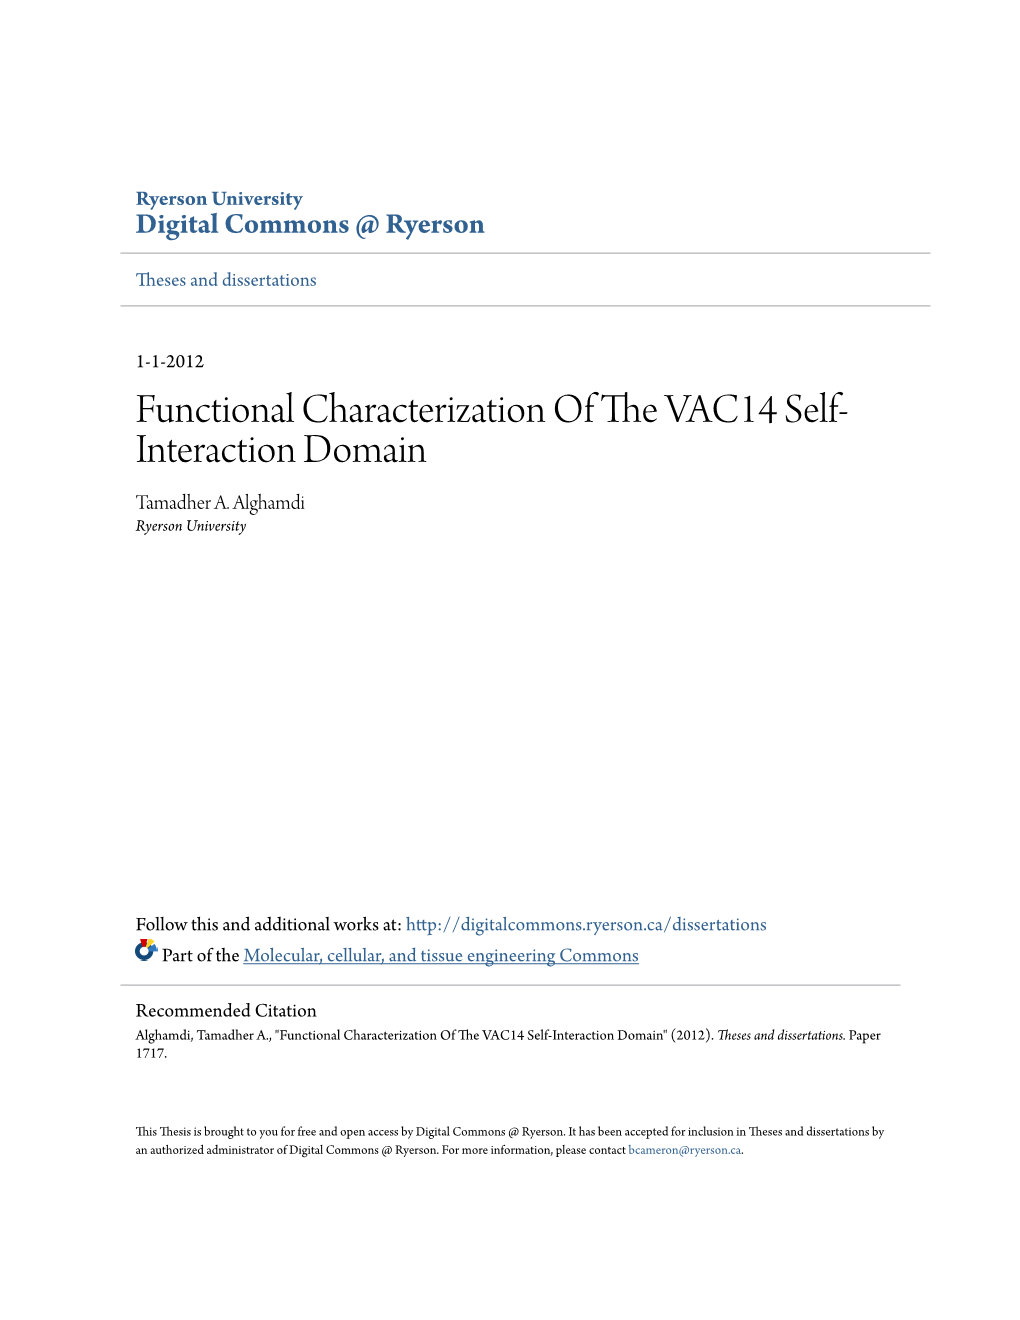 Functional Characterization of the VAC14 Self-Interaction Domain